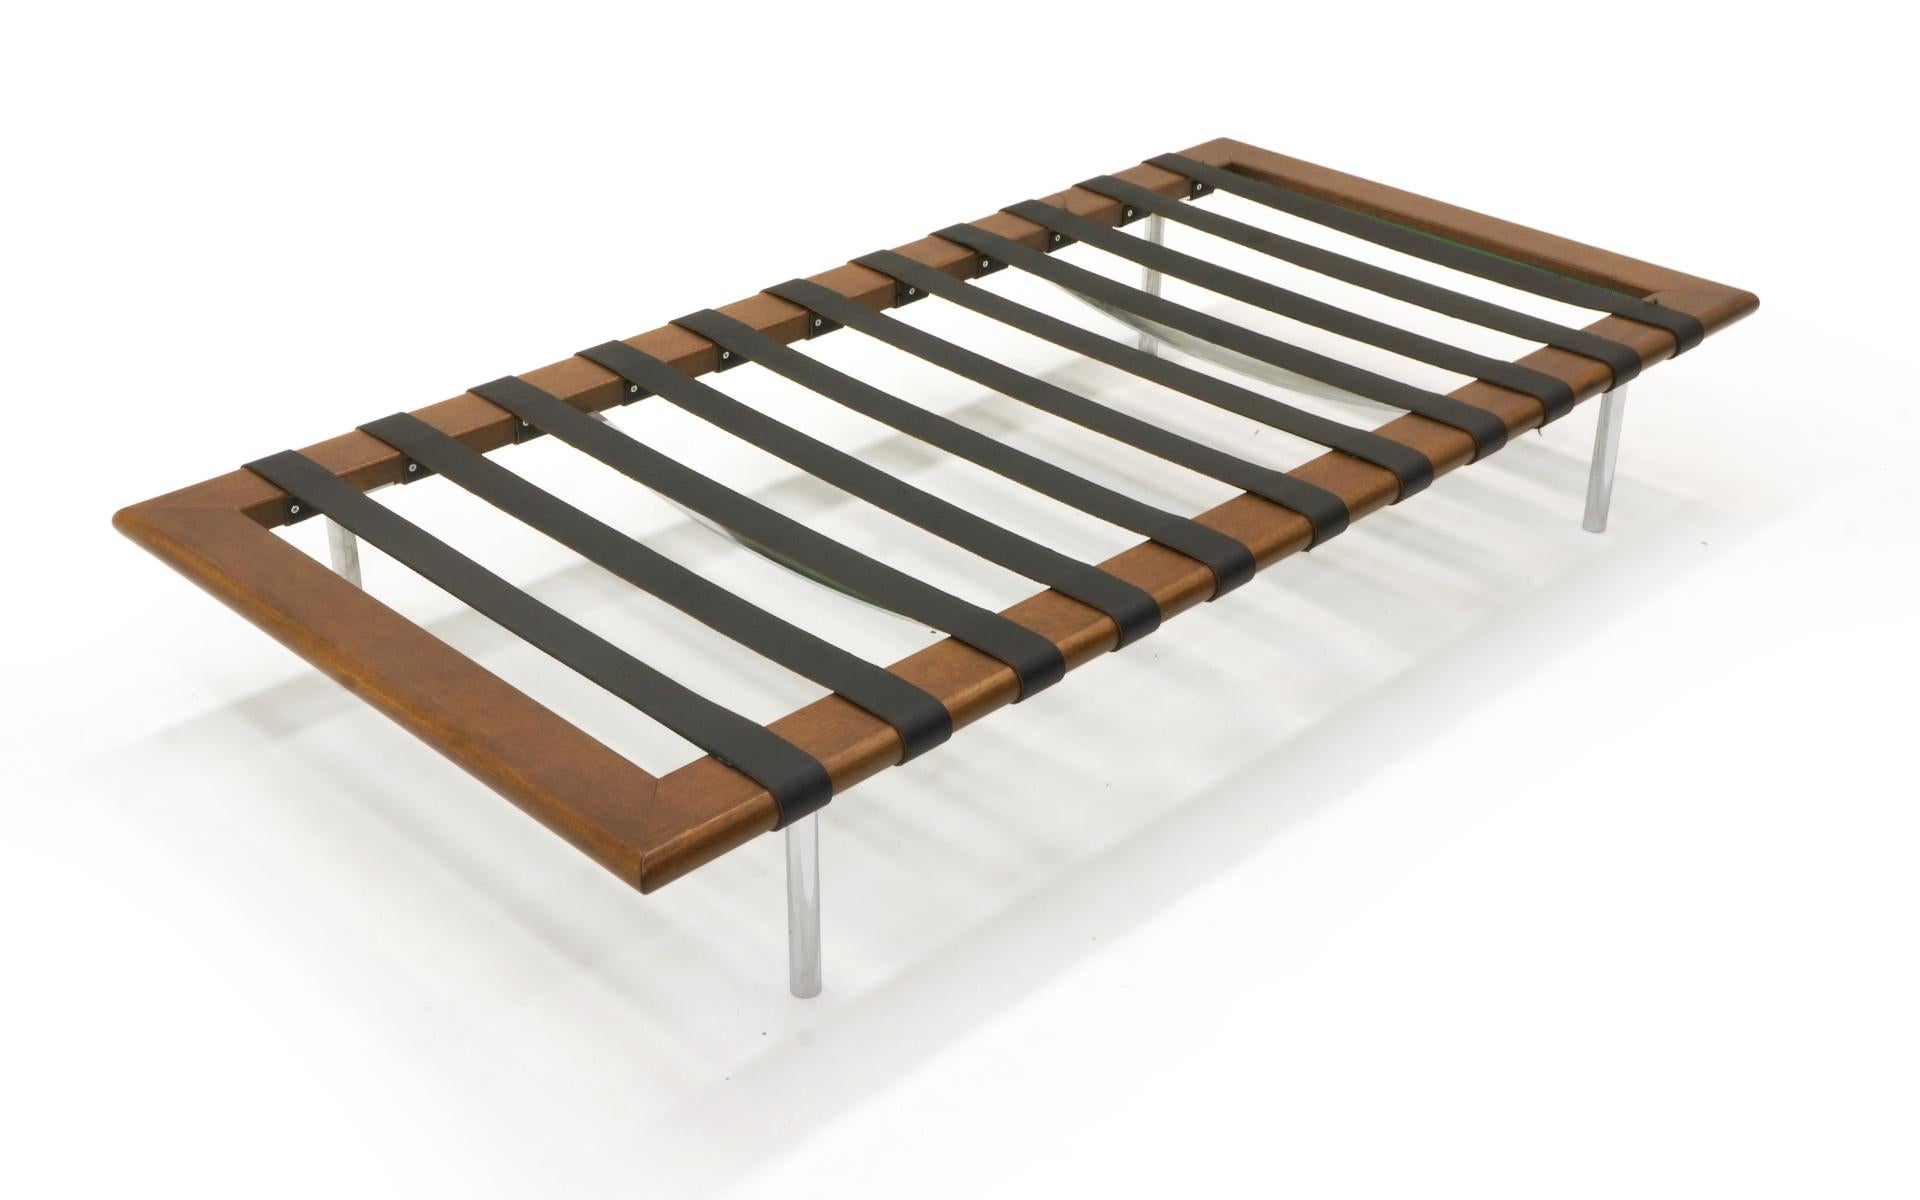 Steel Barcelona Day Bed by Mies van der Rohe for Knoll, Black Leather